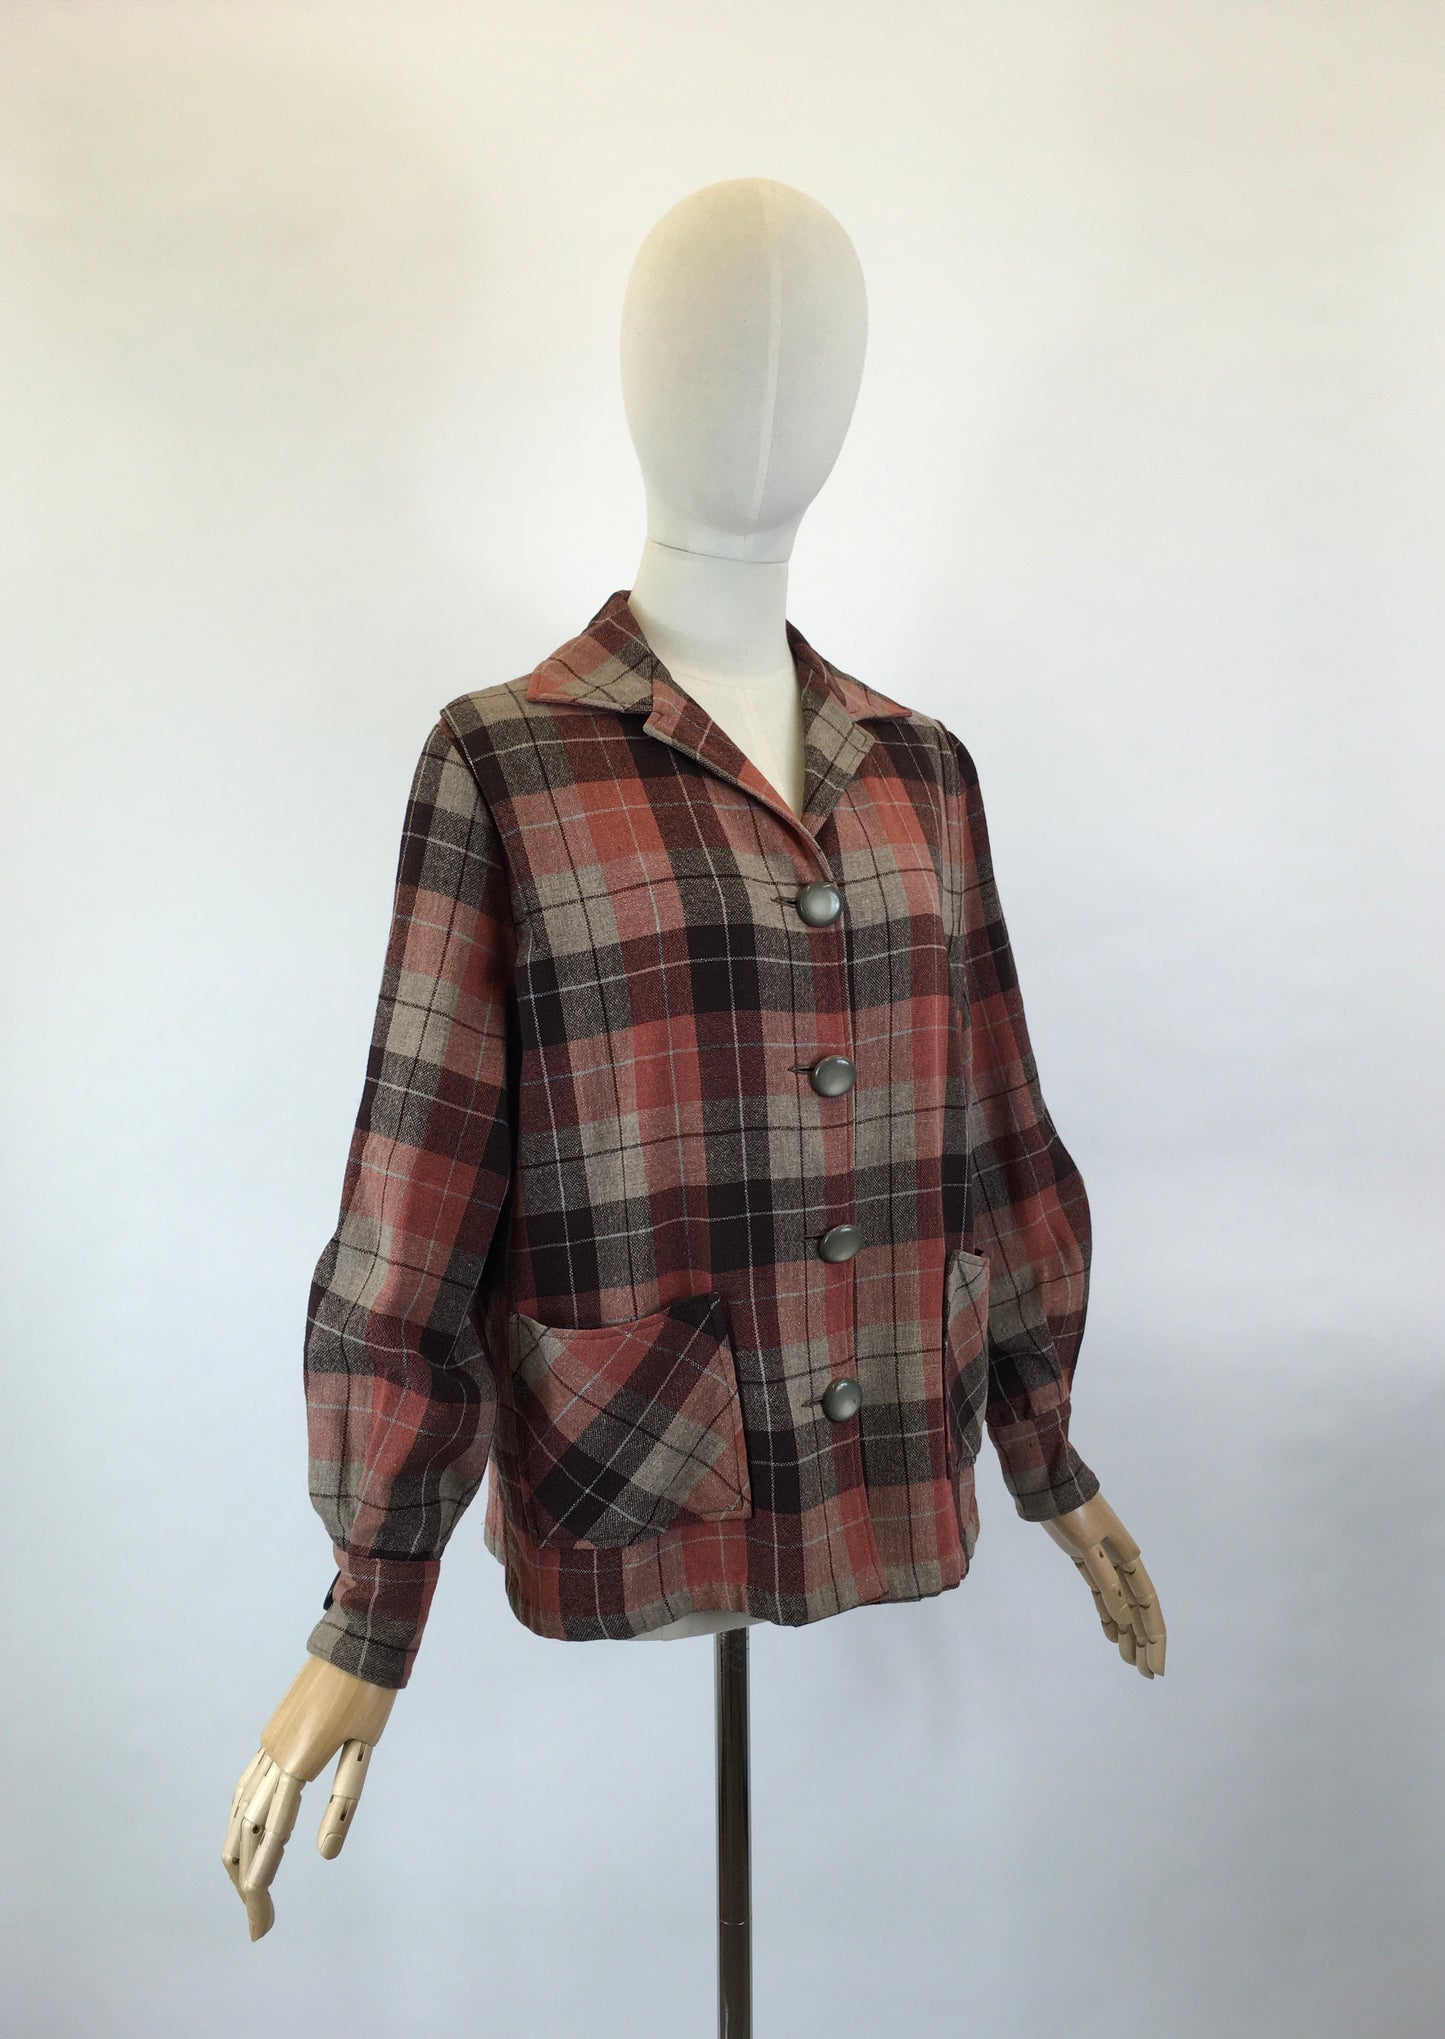 Original 1940’s Plaid Sportwear Jacket - In Autumnal Warm Hues of Spice, Brown and Pale Blue